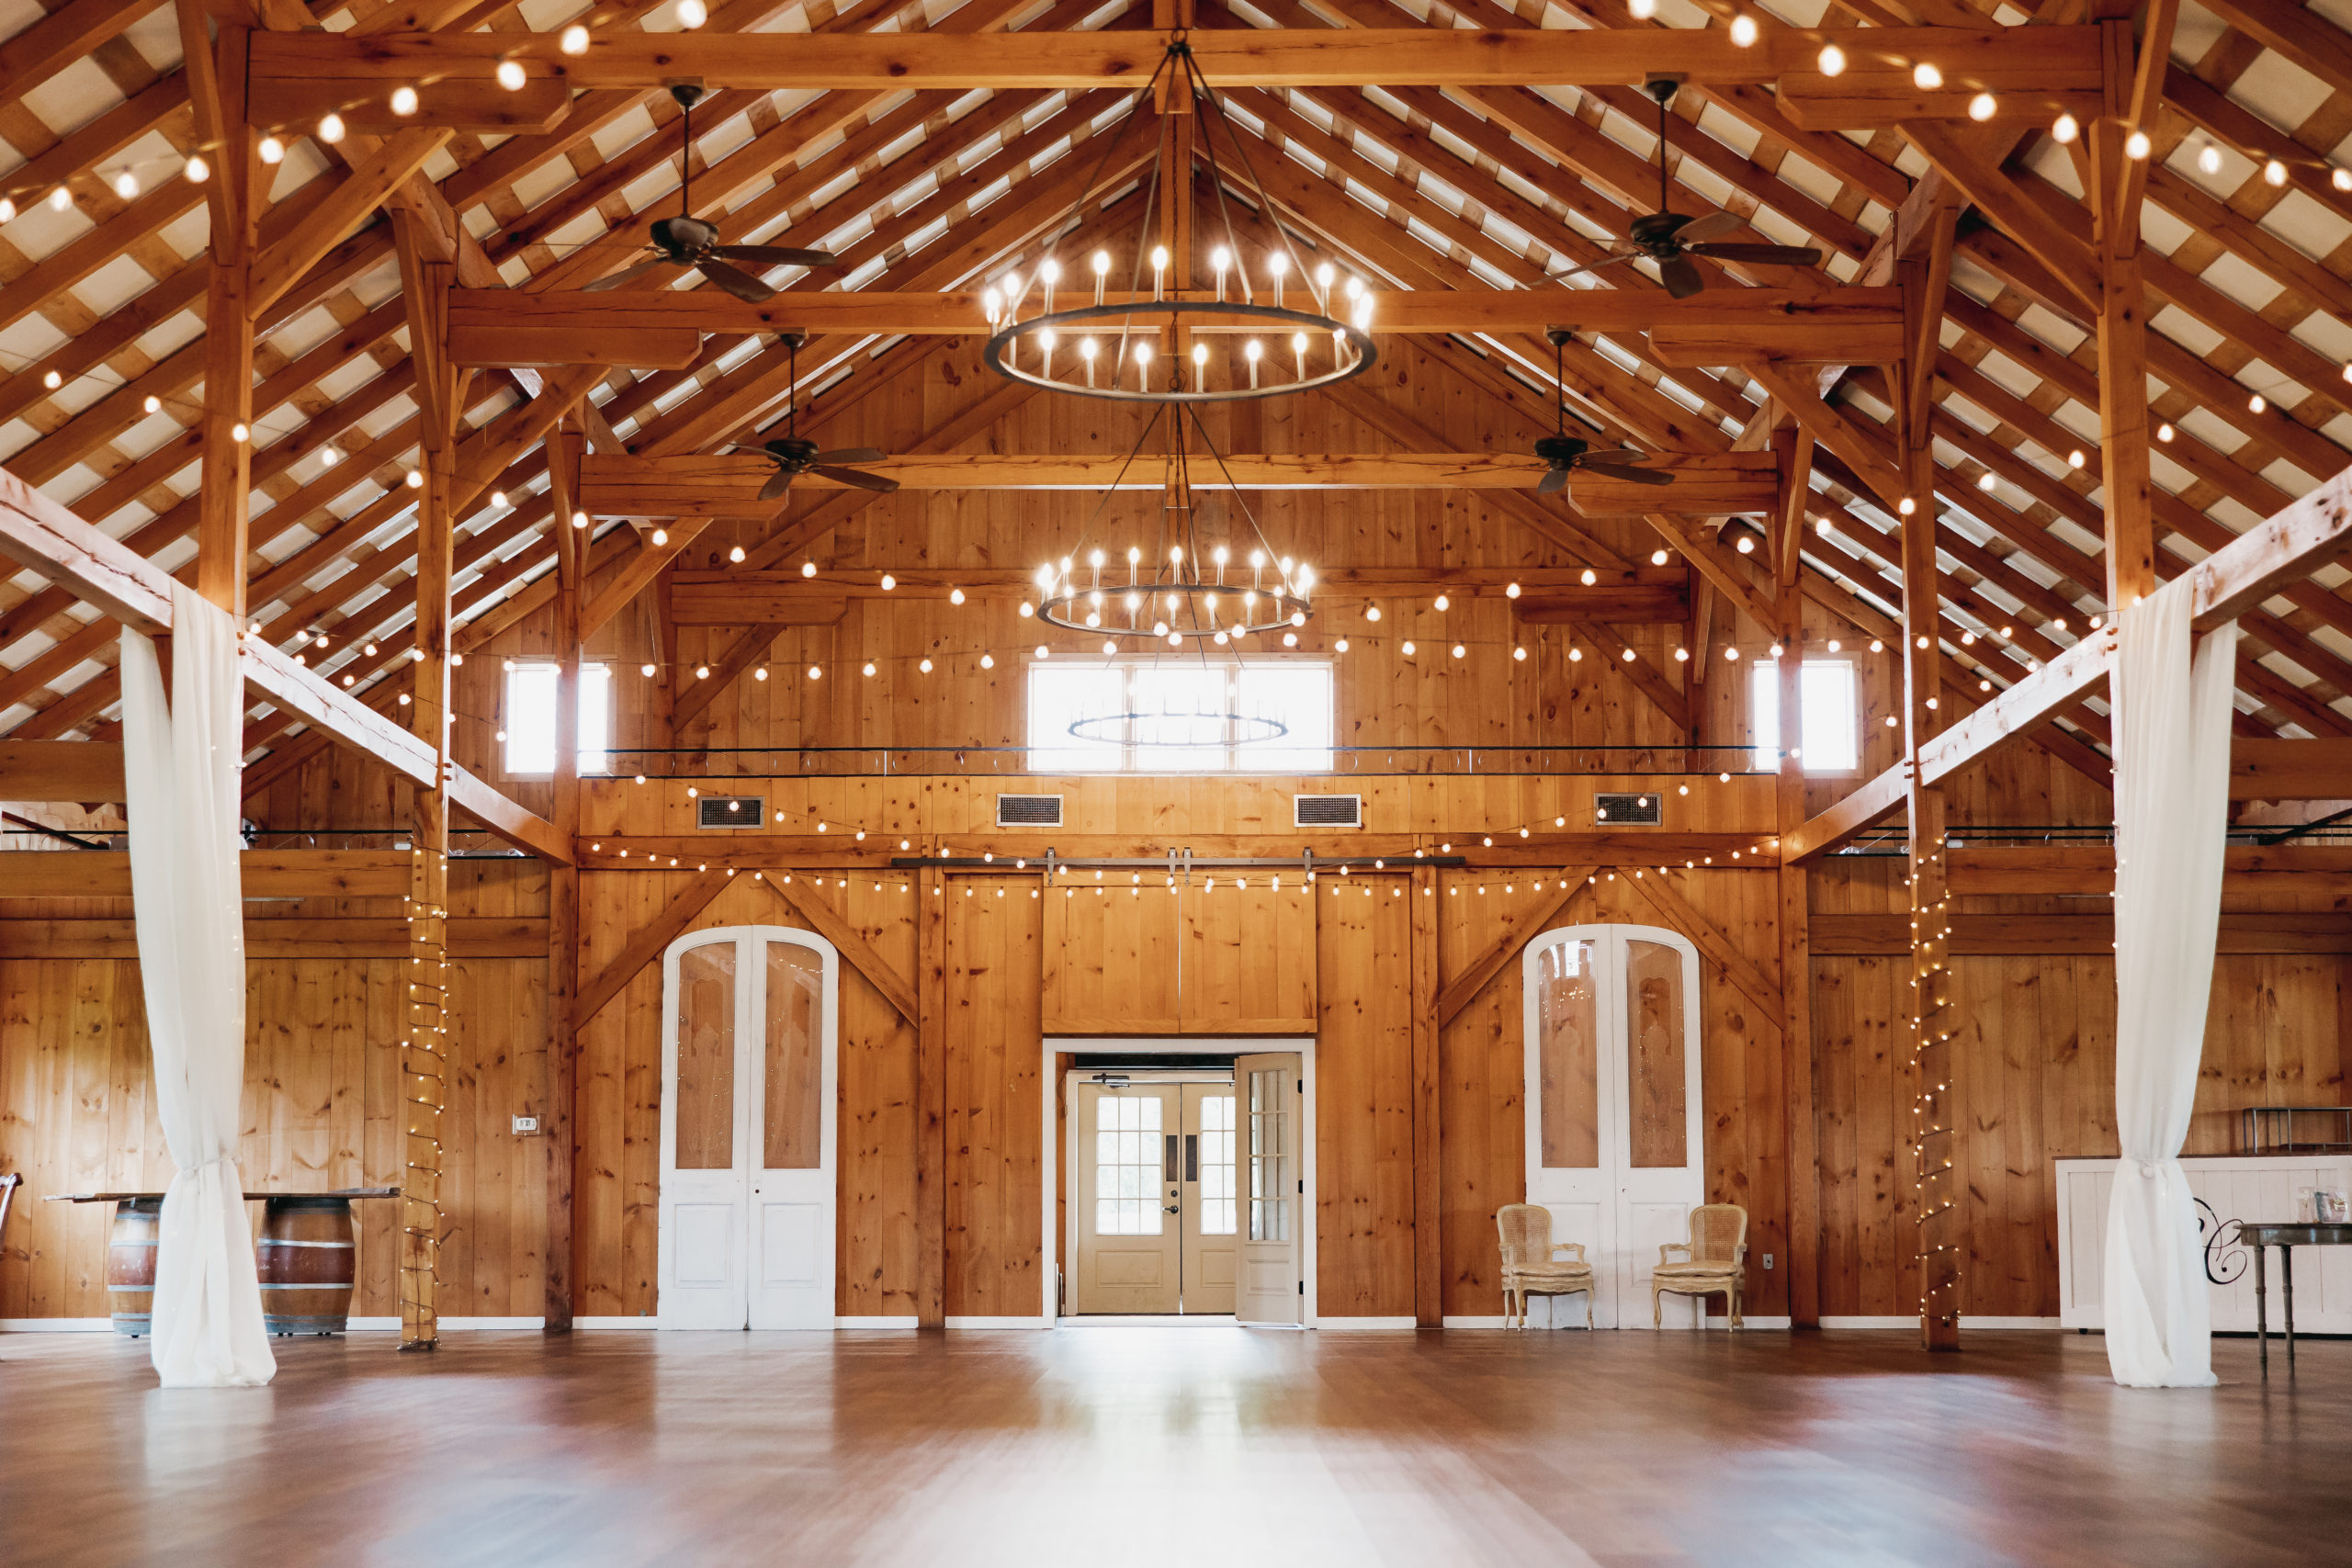 Shadow Creek Wedding Ultimate Planning Guide: Barn ballroom with chandeliers overhead with string lights and curtains draping from wooden beams.